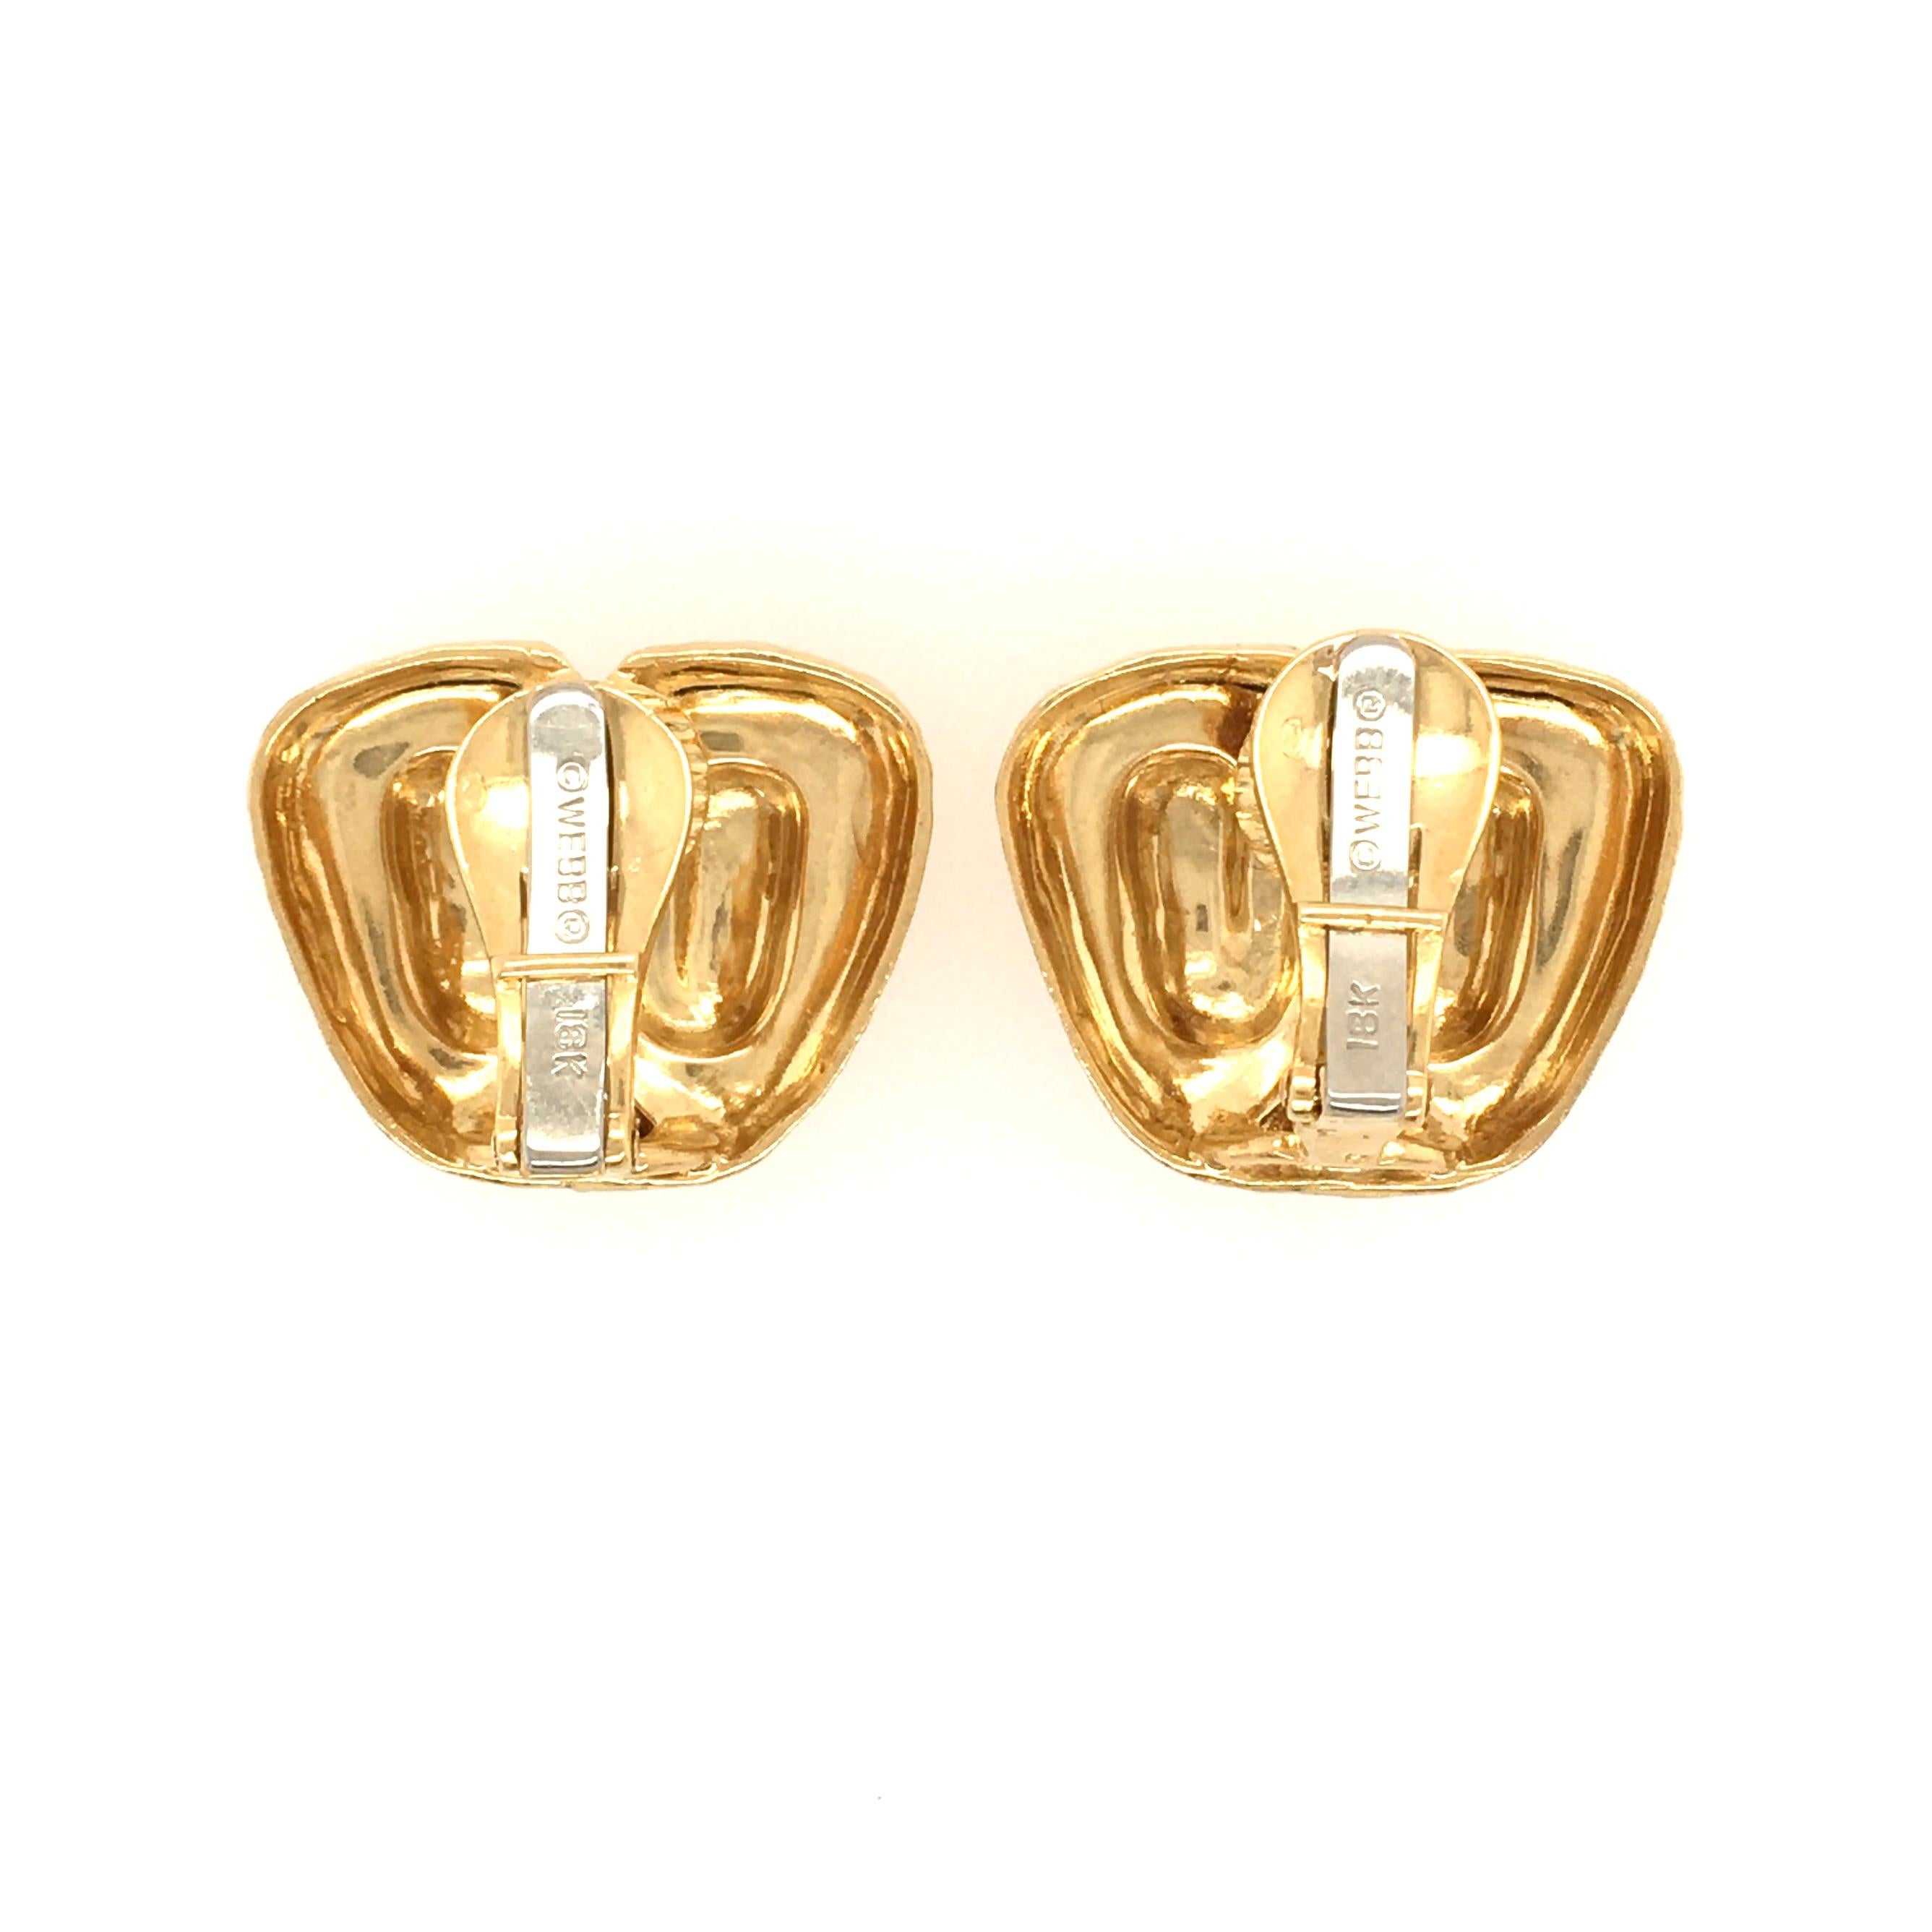 A pair of 18 karat yellow gold earrings with clip backs. David Webb. The hammered finish irregular shaped earrings measure 15/16 inch wide and 12/16 inch from top to bottom. The clips are stamped © WEBB ®.  Gross weight is approximately 22.55 grams.